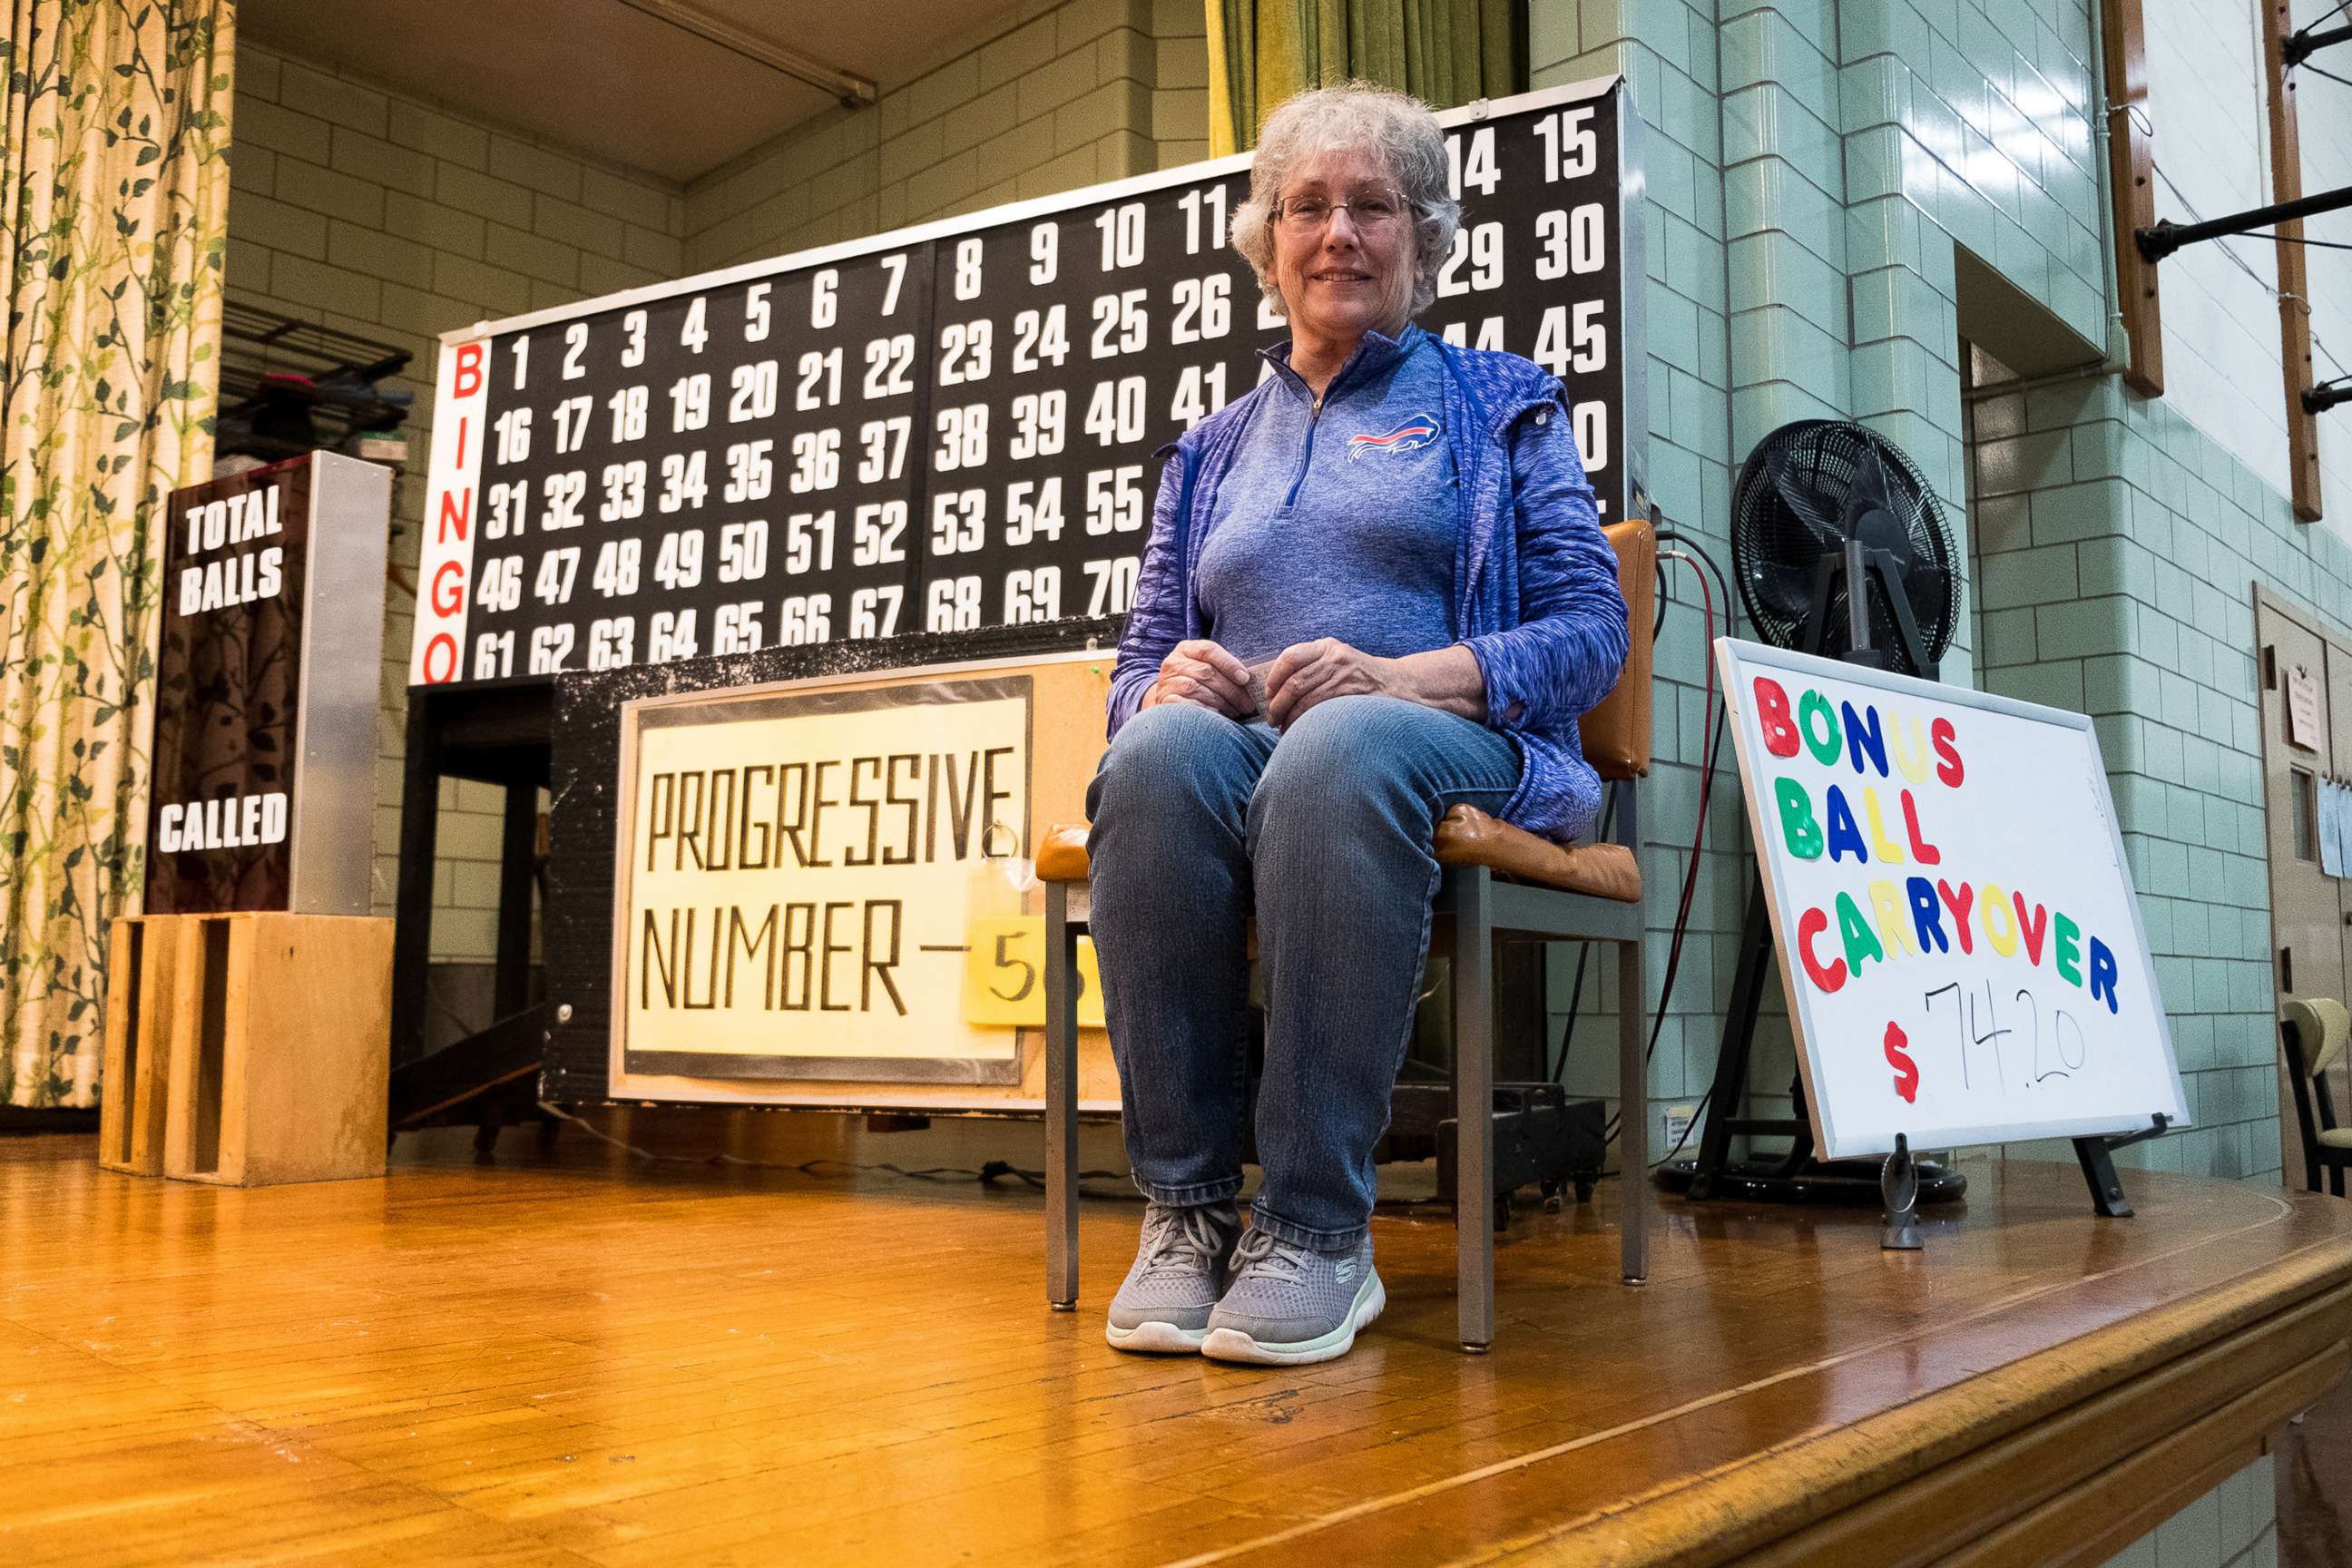 PHOTO: Kathy Press oversees the Thursday night BINGO game some Tops workers attend at Blessed Trinity Catholic Church in Buffalo.